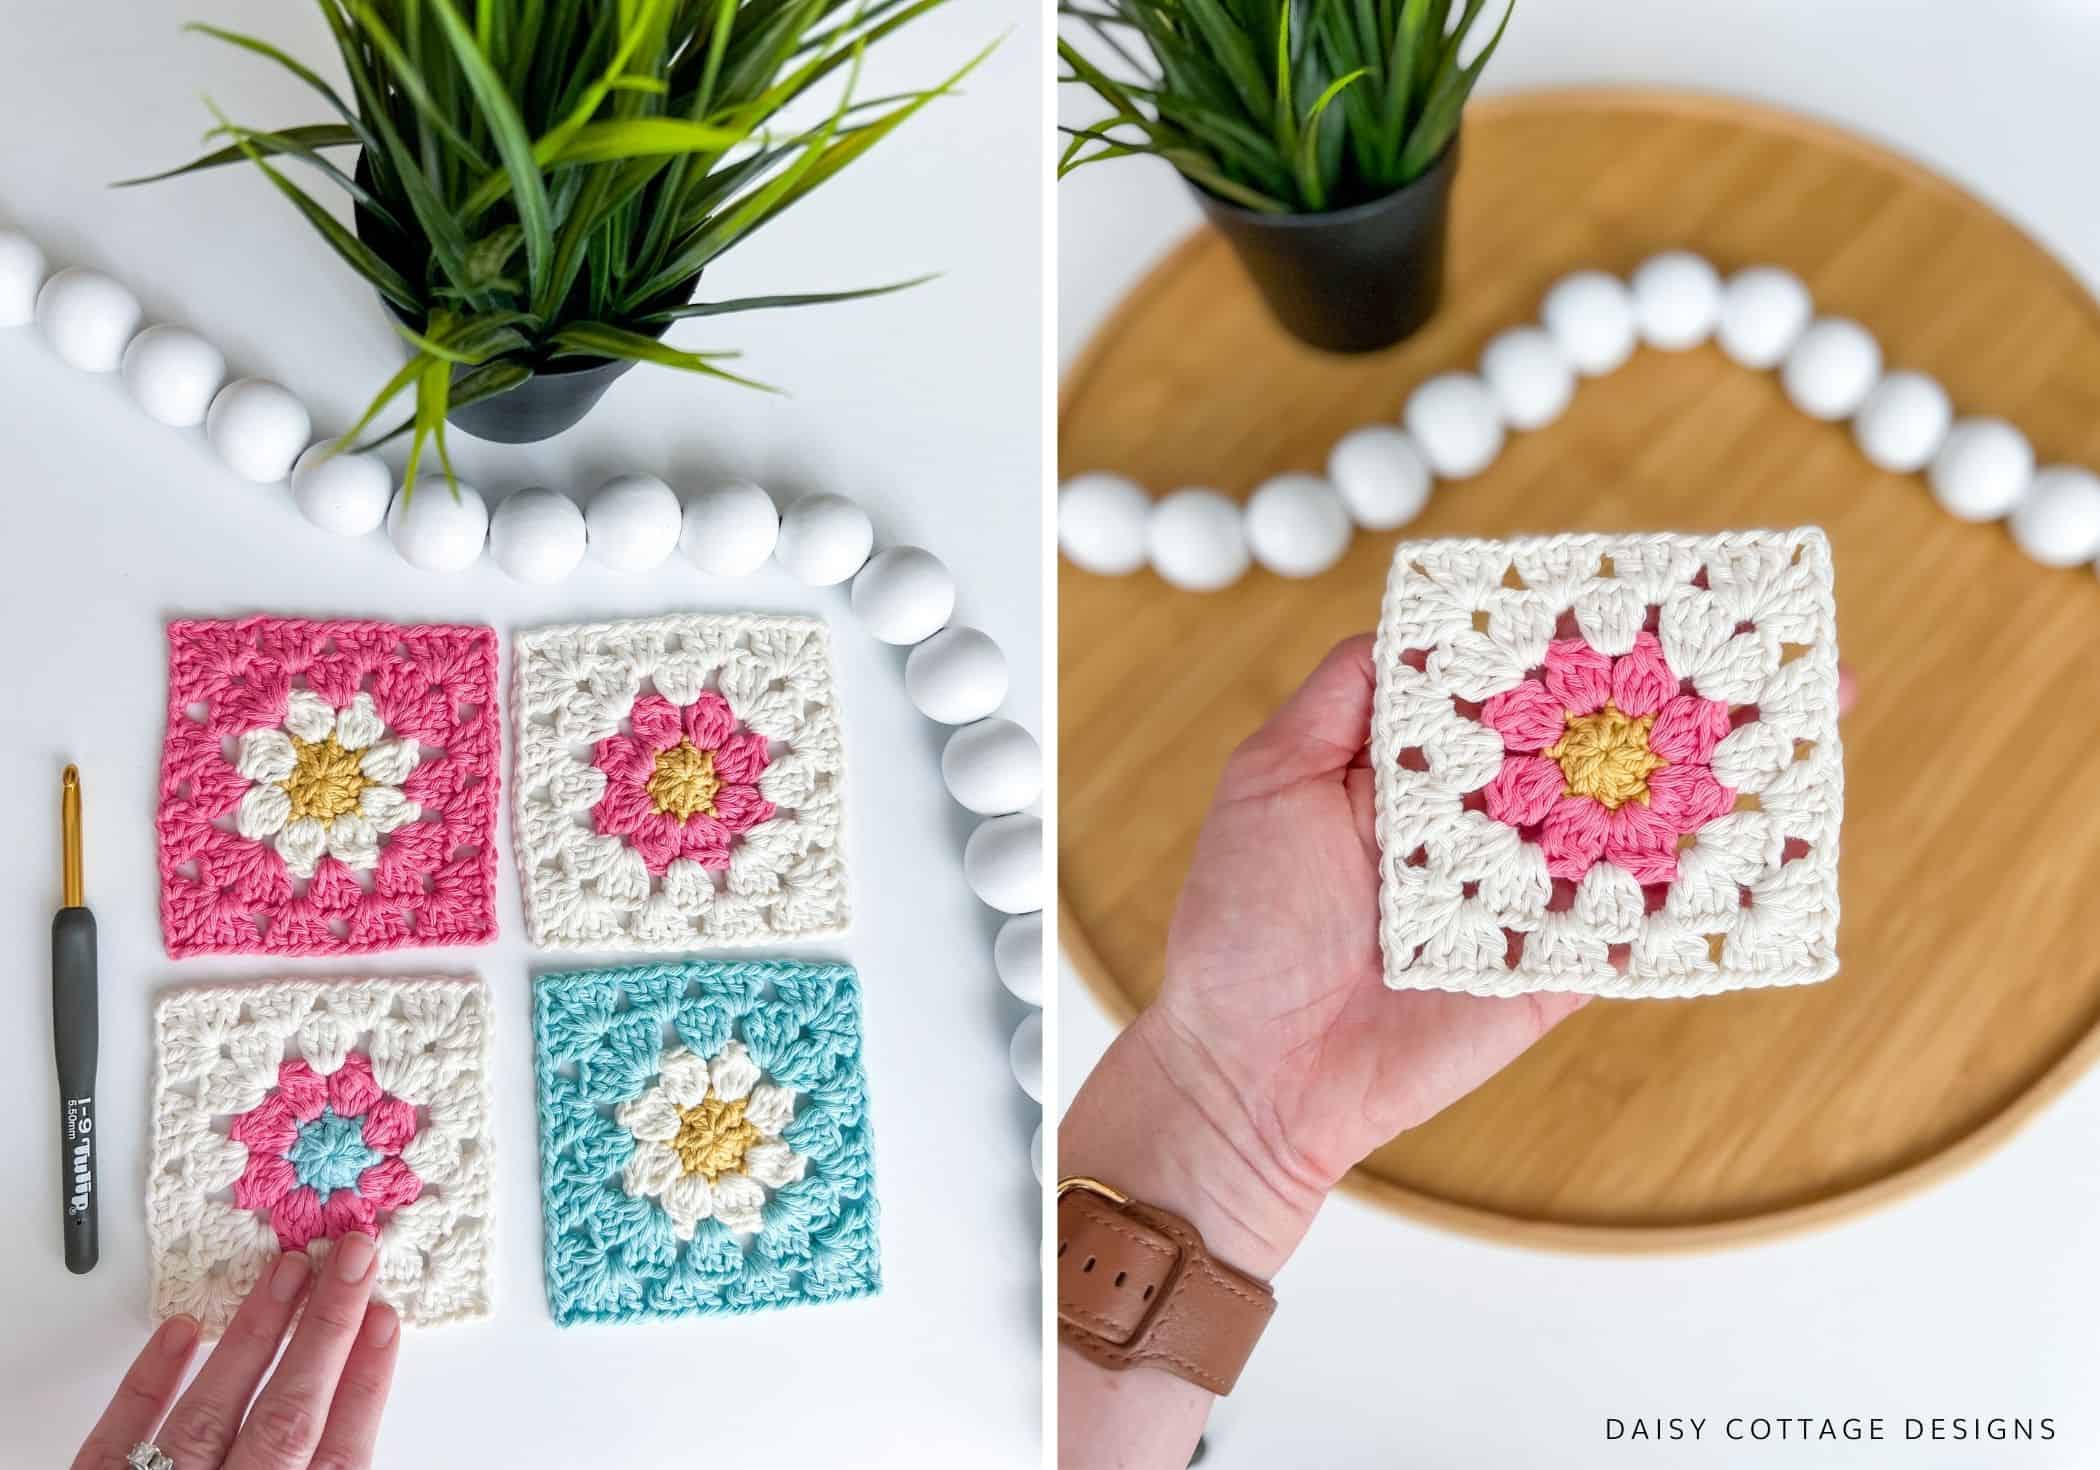 Crocheted squares with daisy